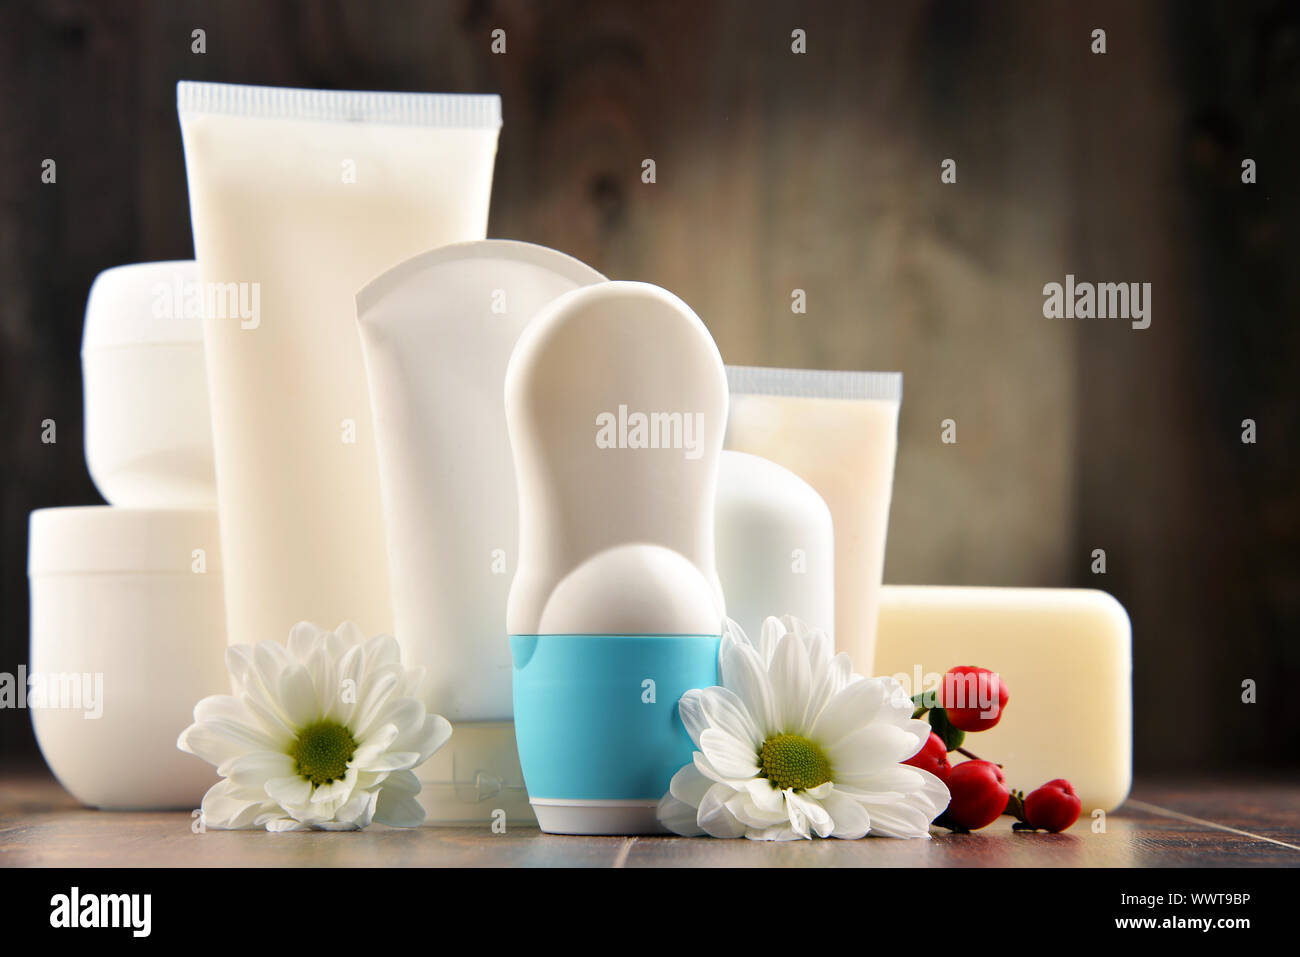 Composition with containers of body care and beauty products. Eco cosmetics. Stock Photo